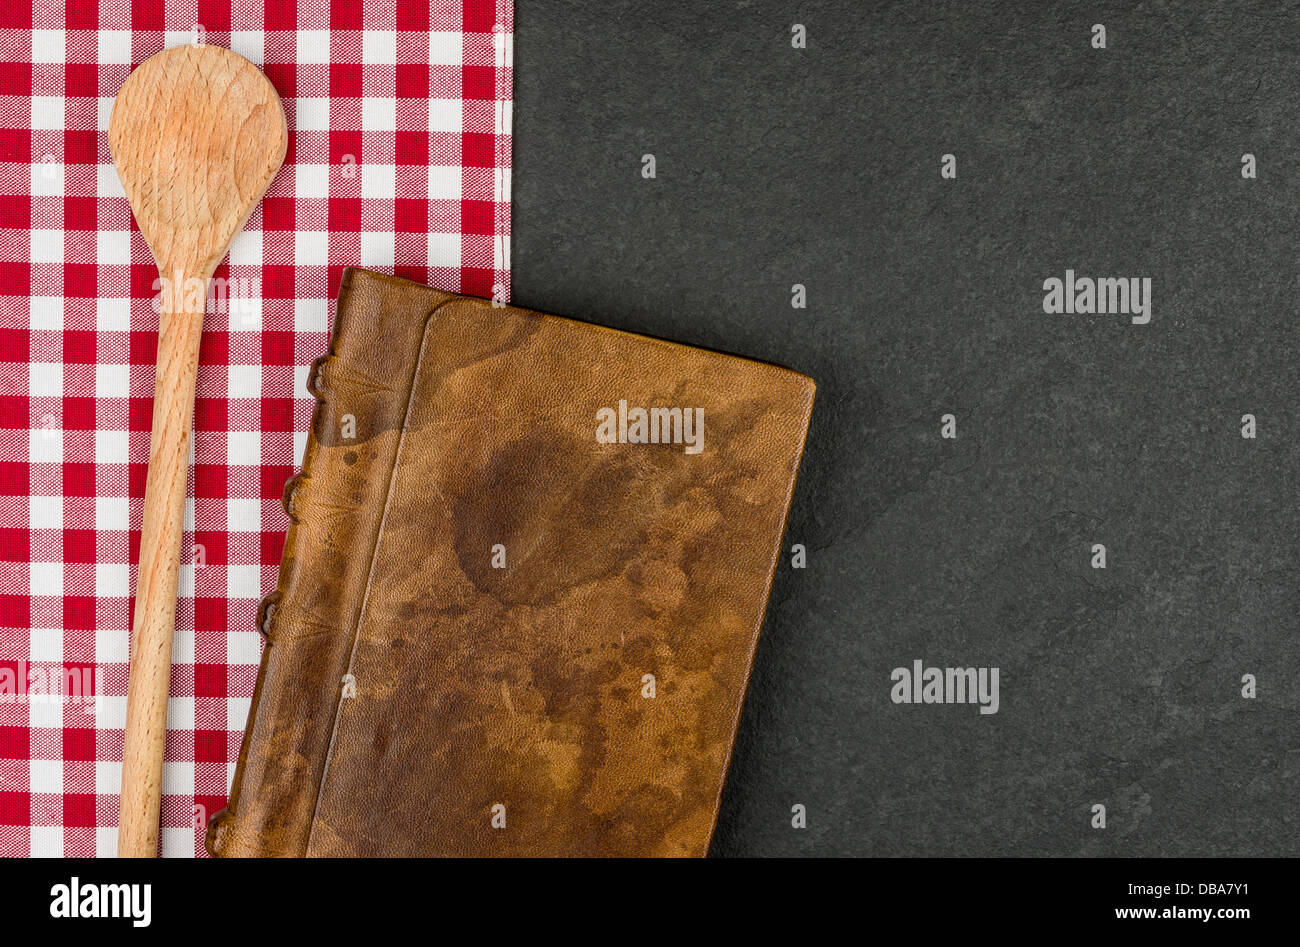 Wooden spoon and coockbook on a slate plate Stock Photo